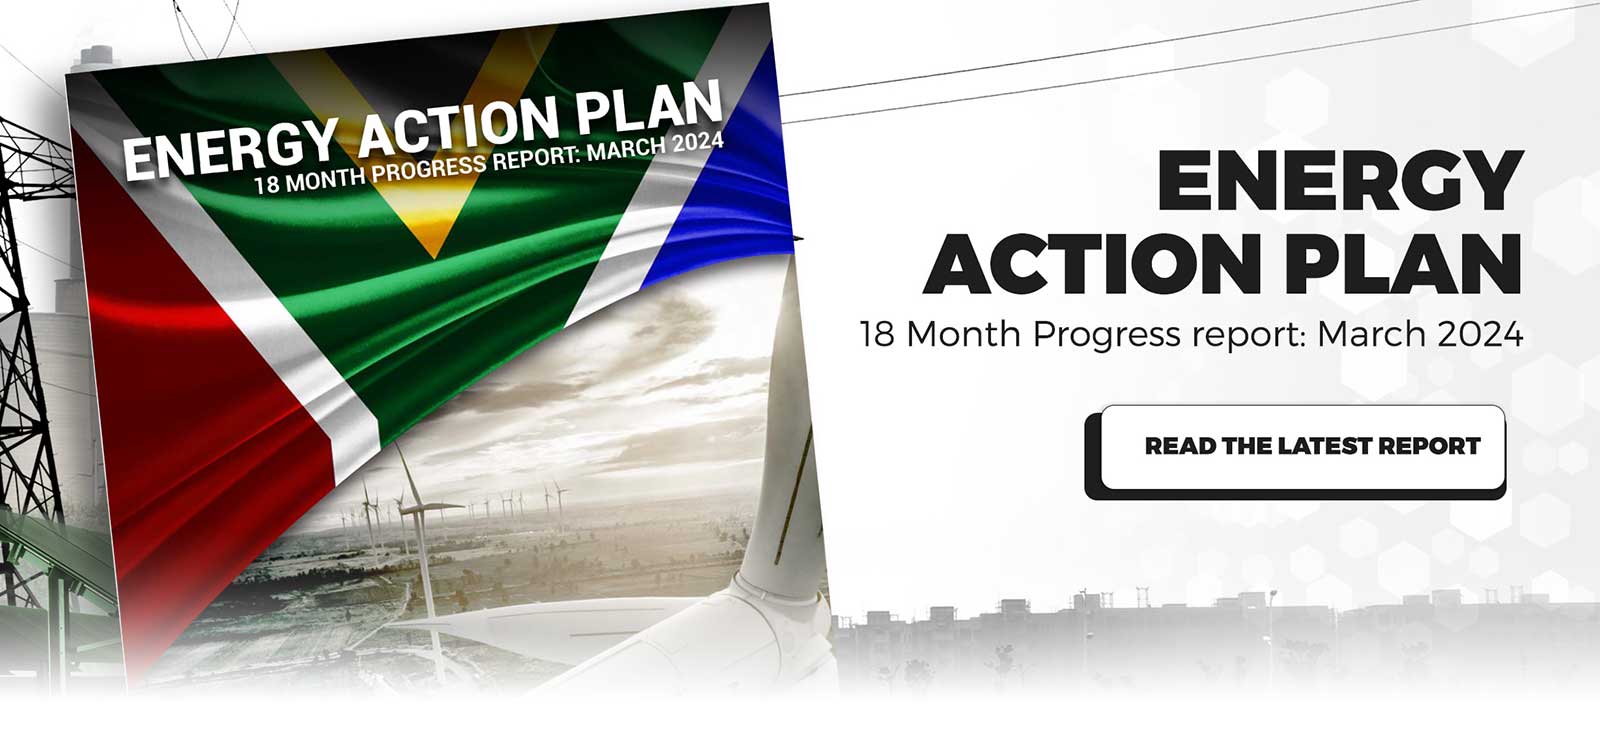 The Energy Action Plan Update